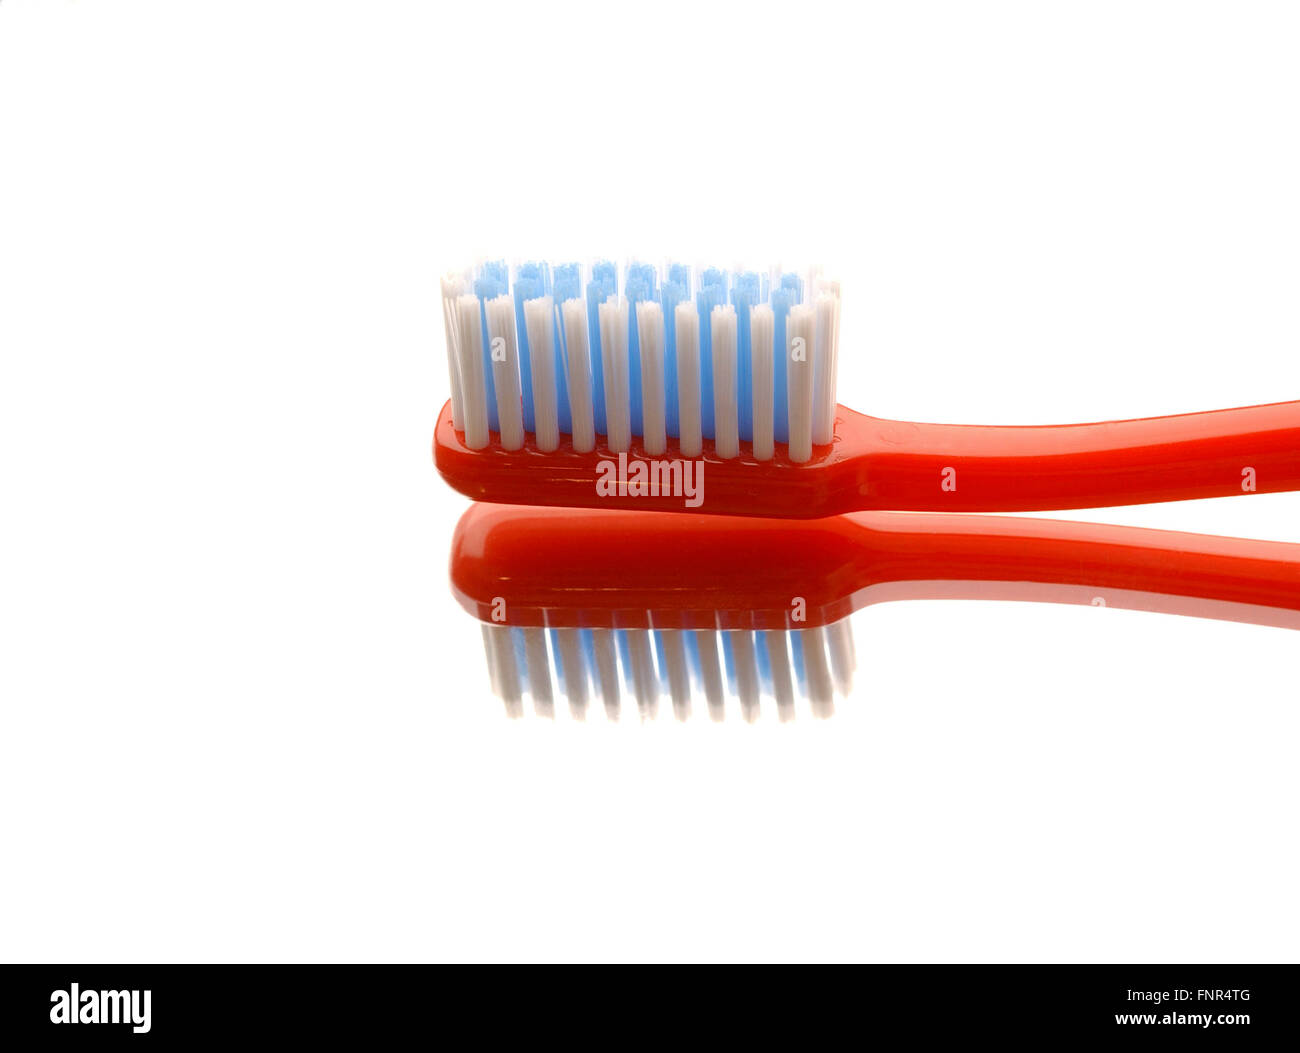 Close-up of a single toothbrush head. Stock Photo